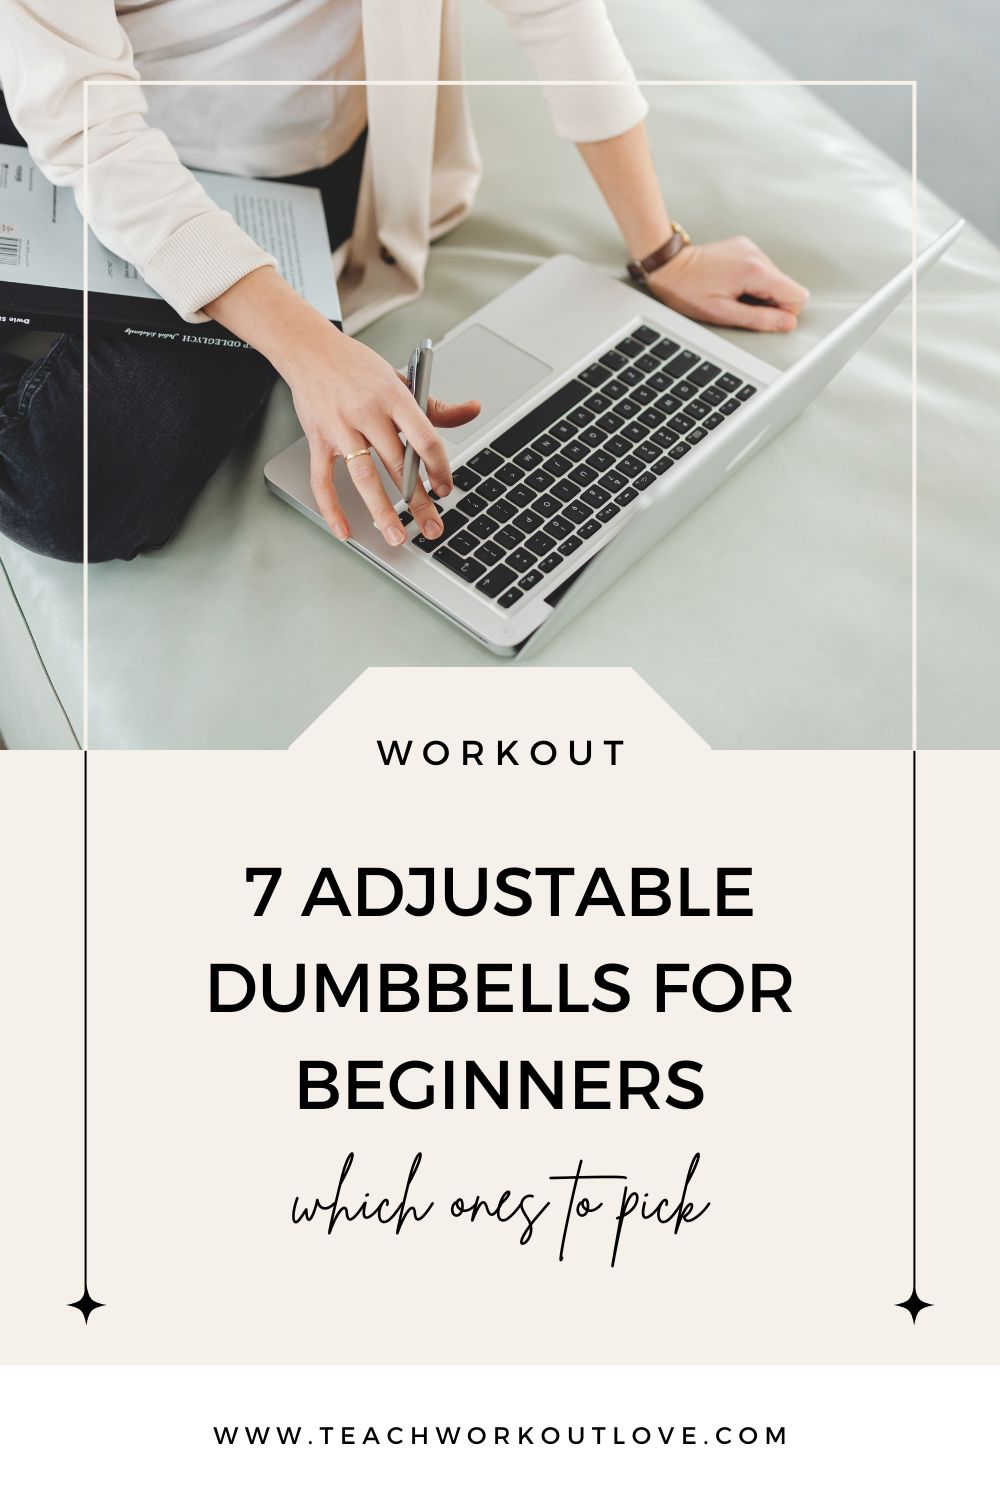 Adjustable dumbbells are perfect for people with limited space since you only need to store one dumbbell instead of a set of dumbbells for each weight. They are also great because you can choose what weight you need for each specific exercise.